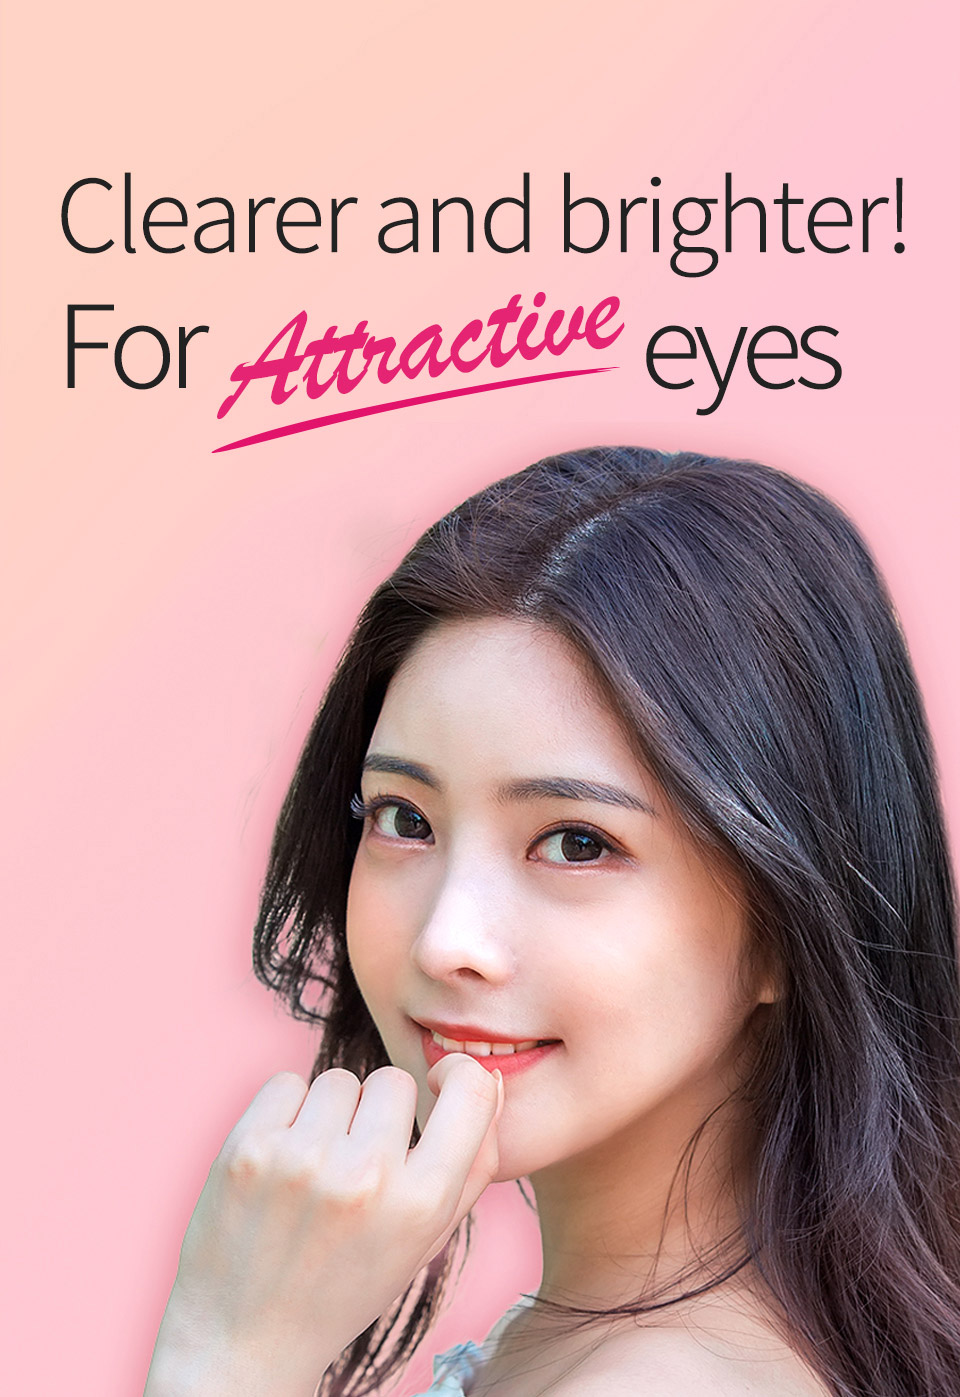 Cleaer and brighter! For youthful eyes